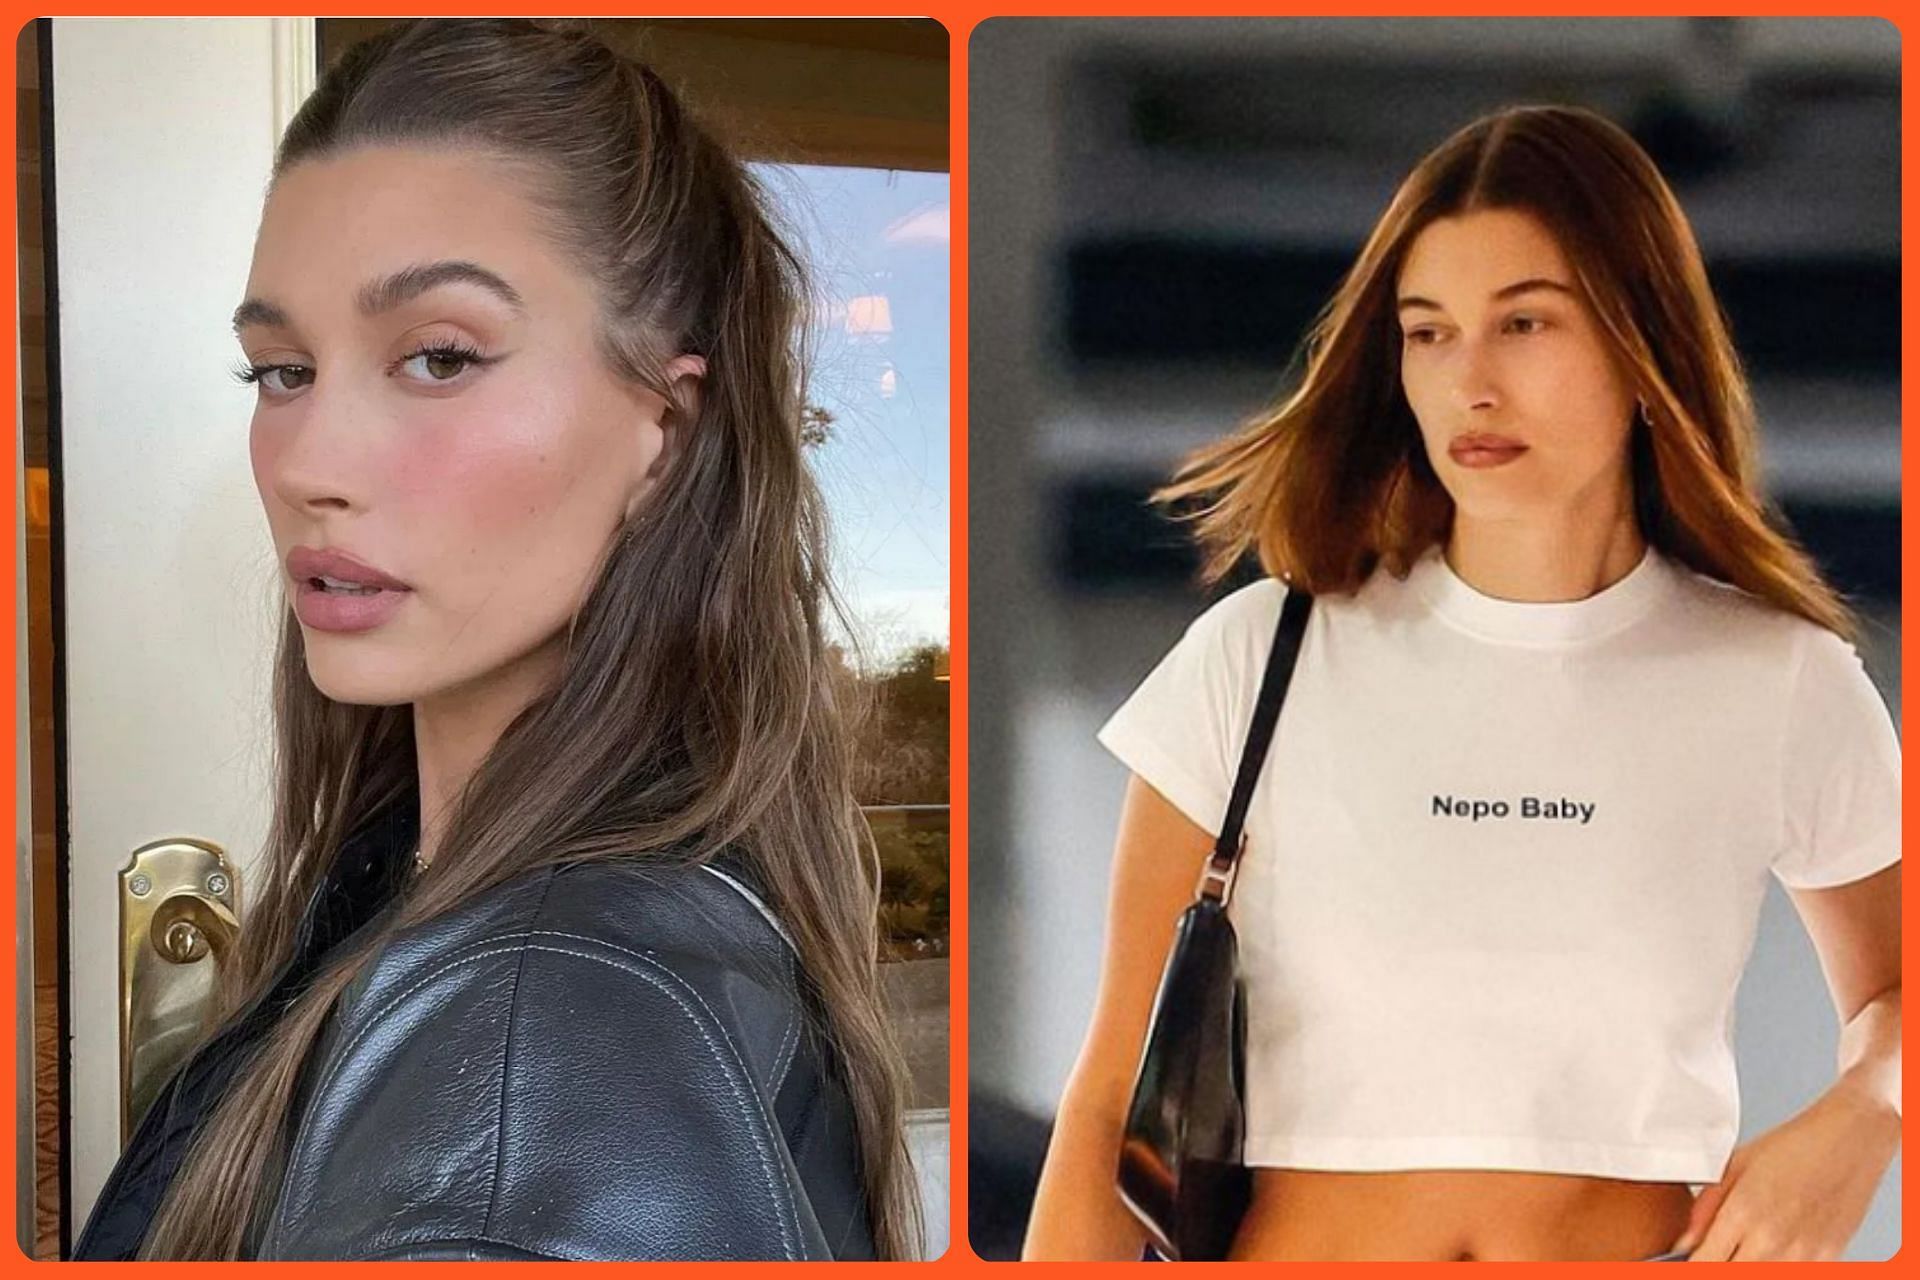 Hailey Bieber makes a statement around the nepotism discourse with her nepo baby T-shirt (Image via Instagram/haileybieber and Rachpoot/Bauer-Griffin/GC Images)